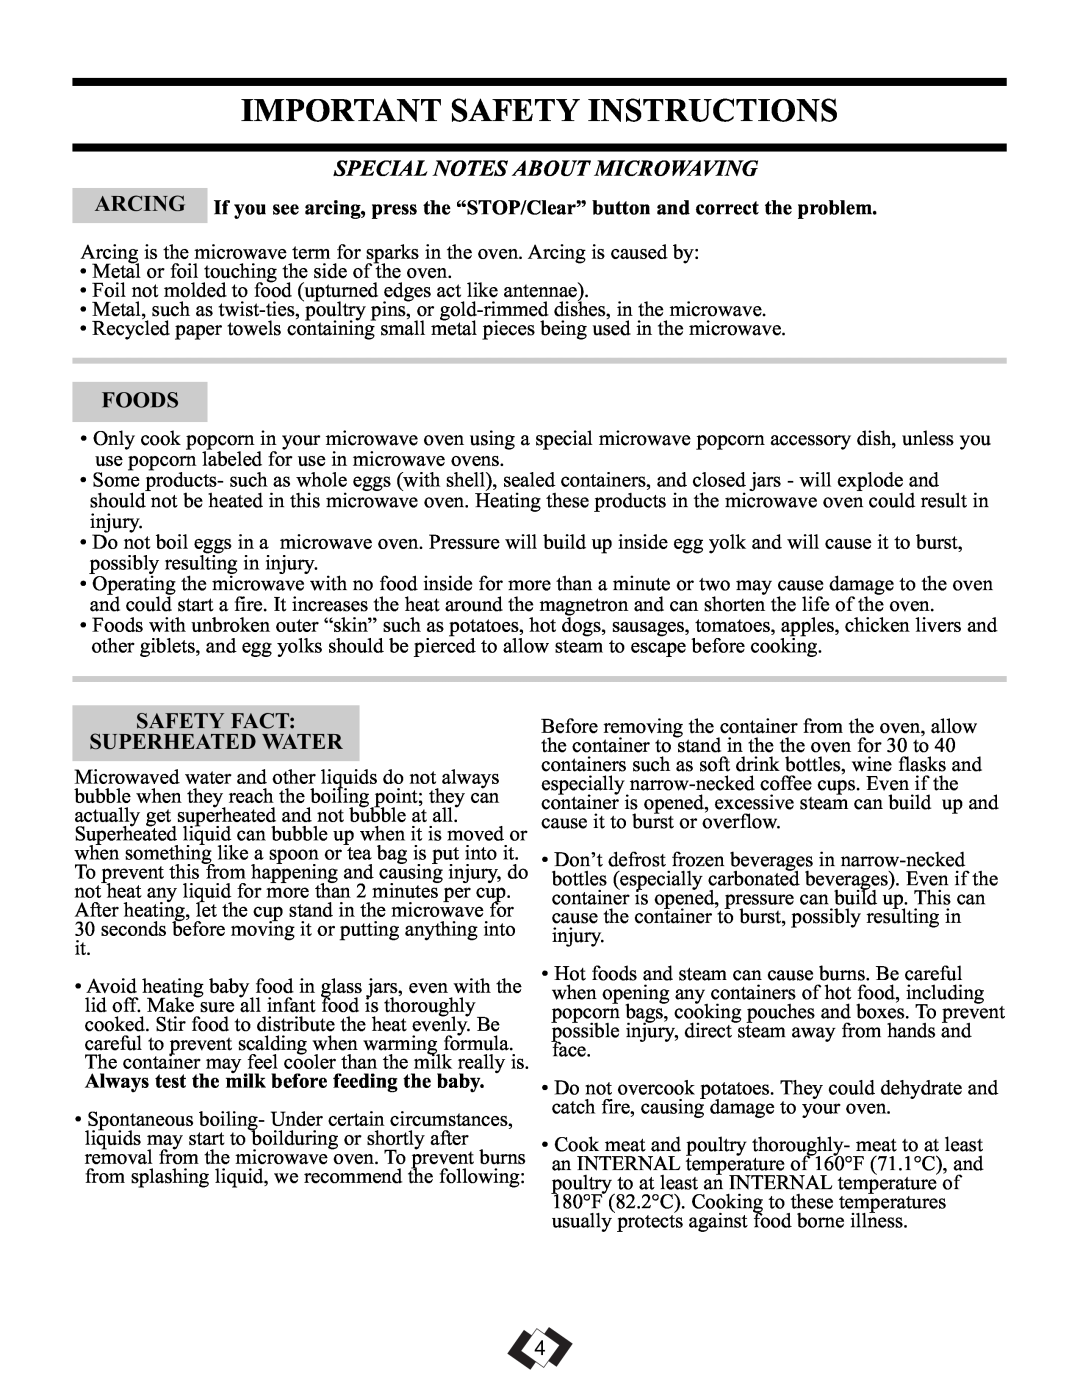 Danby DMW099BLSDD Important Safety Instructions, Special Notes About Microwaving, Foods, Safety Fact Superheated Water 